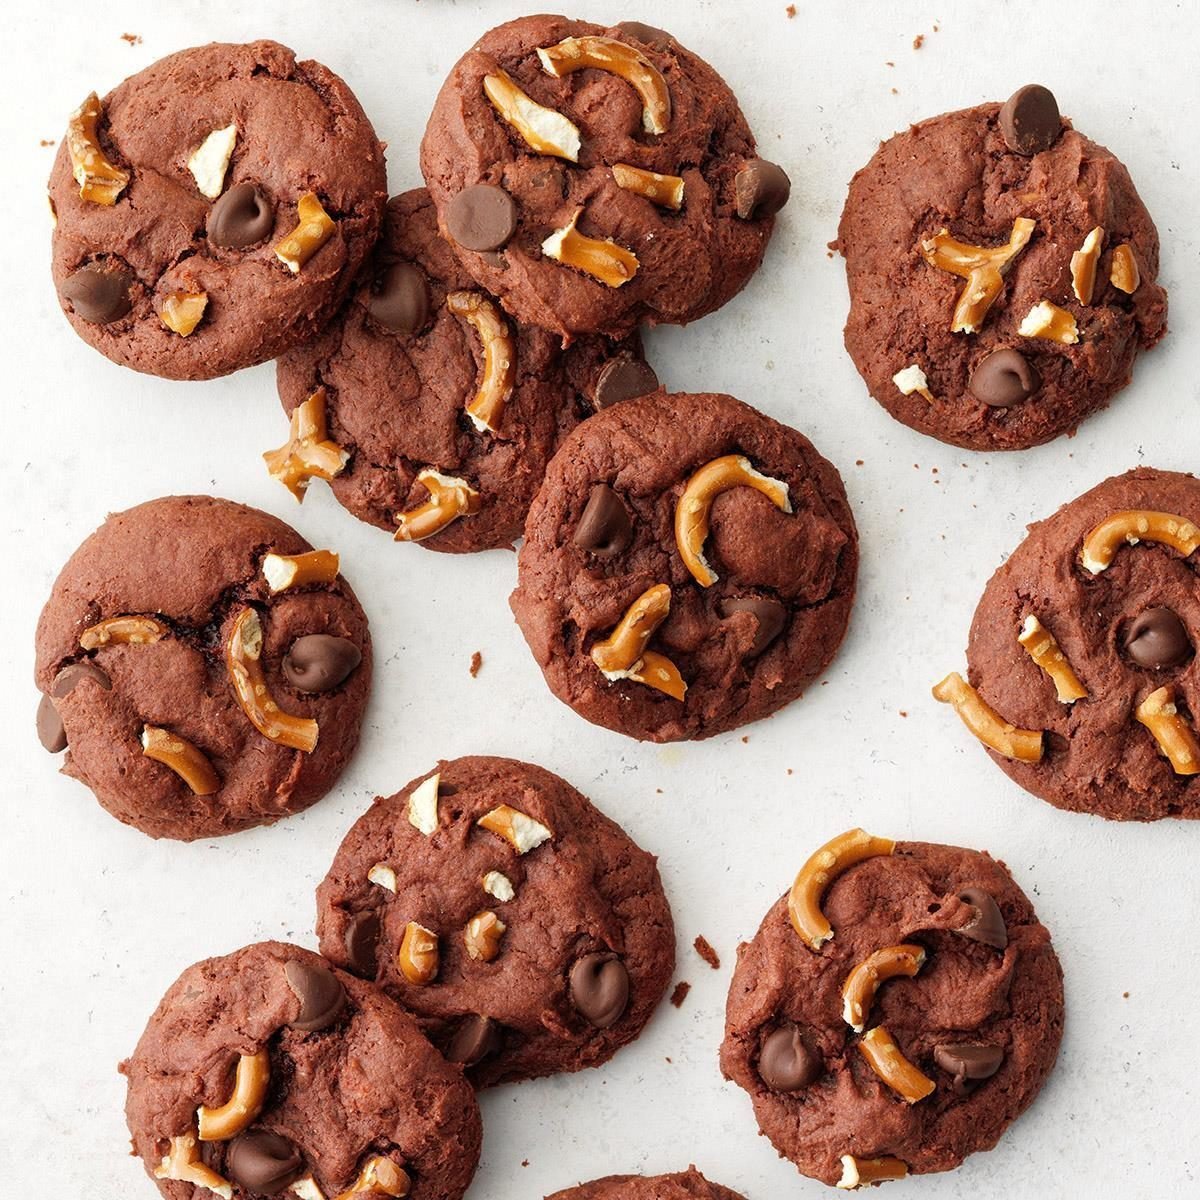 Pretzel and Salted Caramel Chocolate Cookies